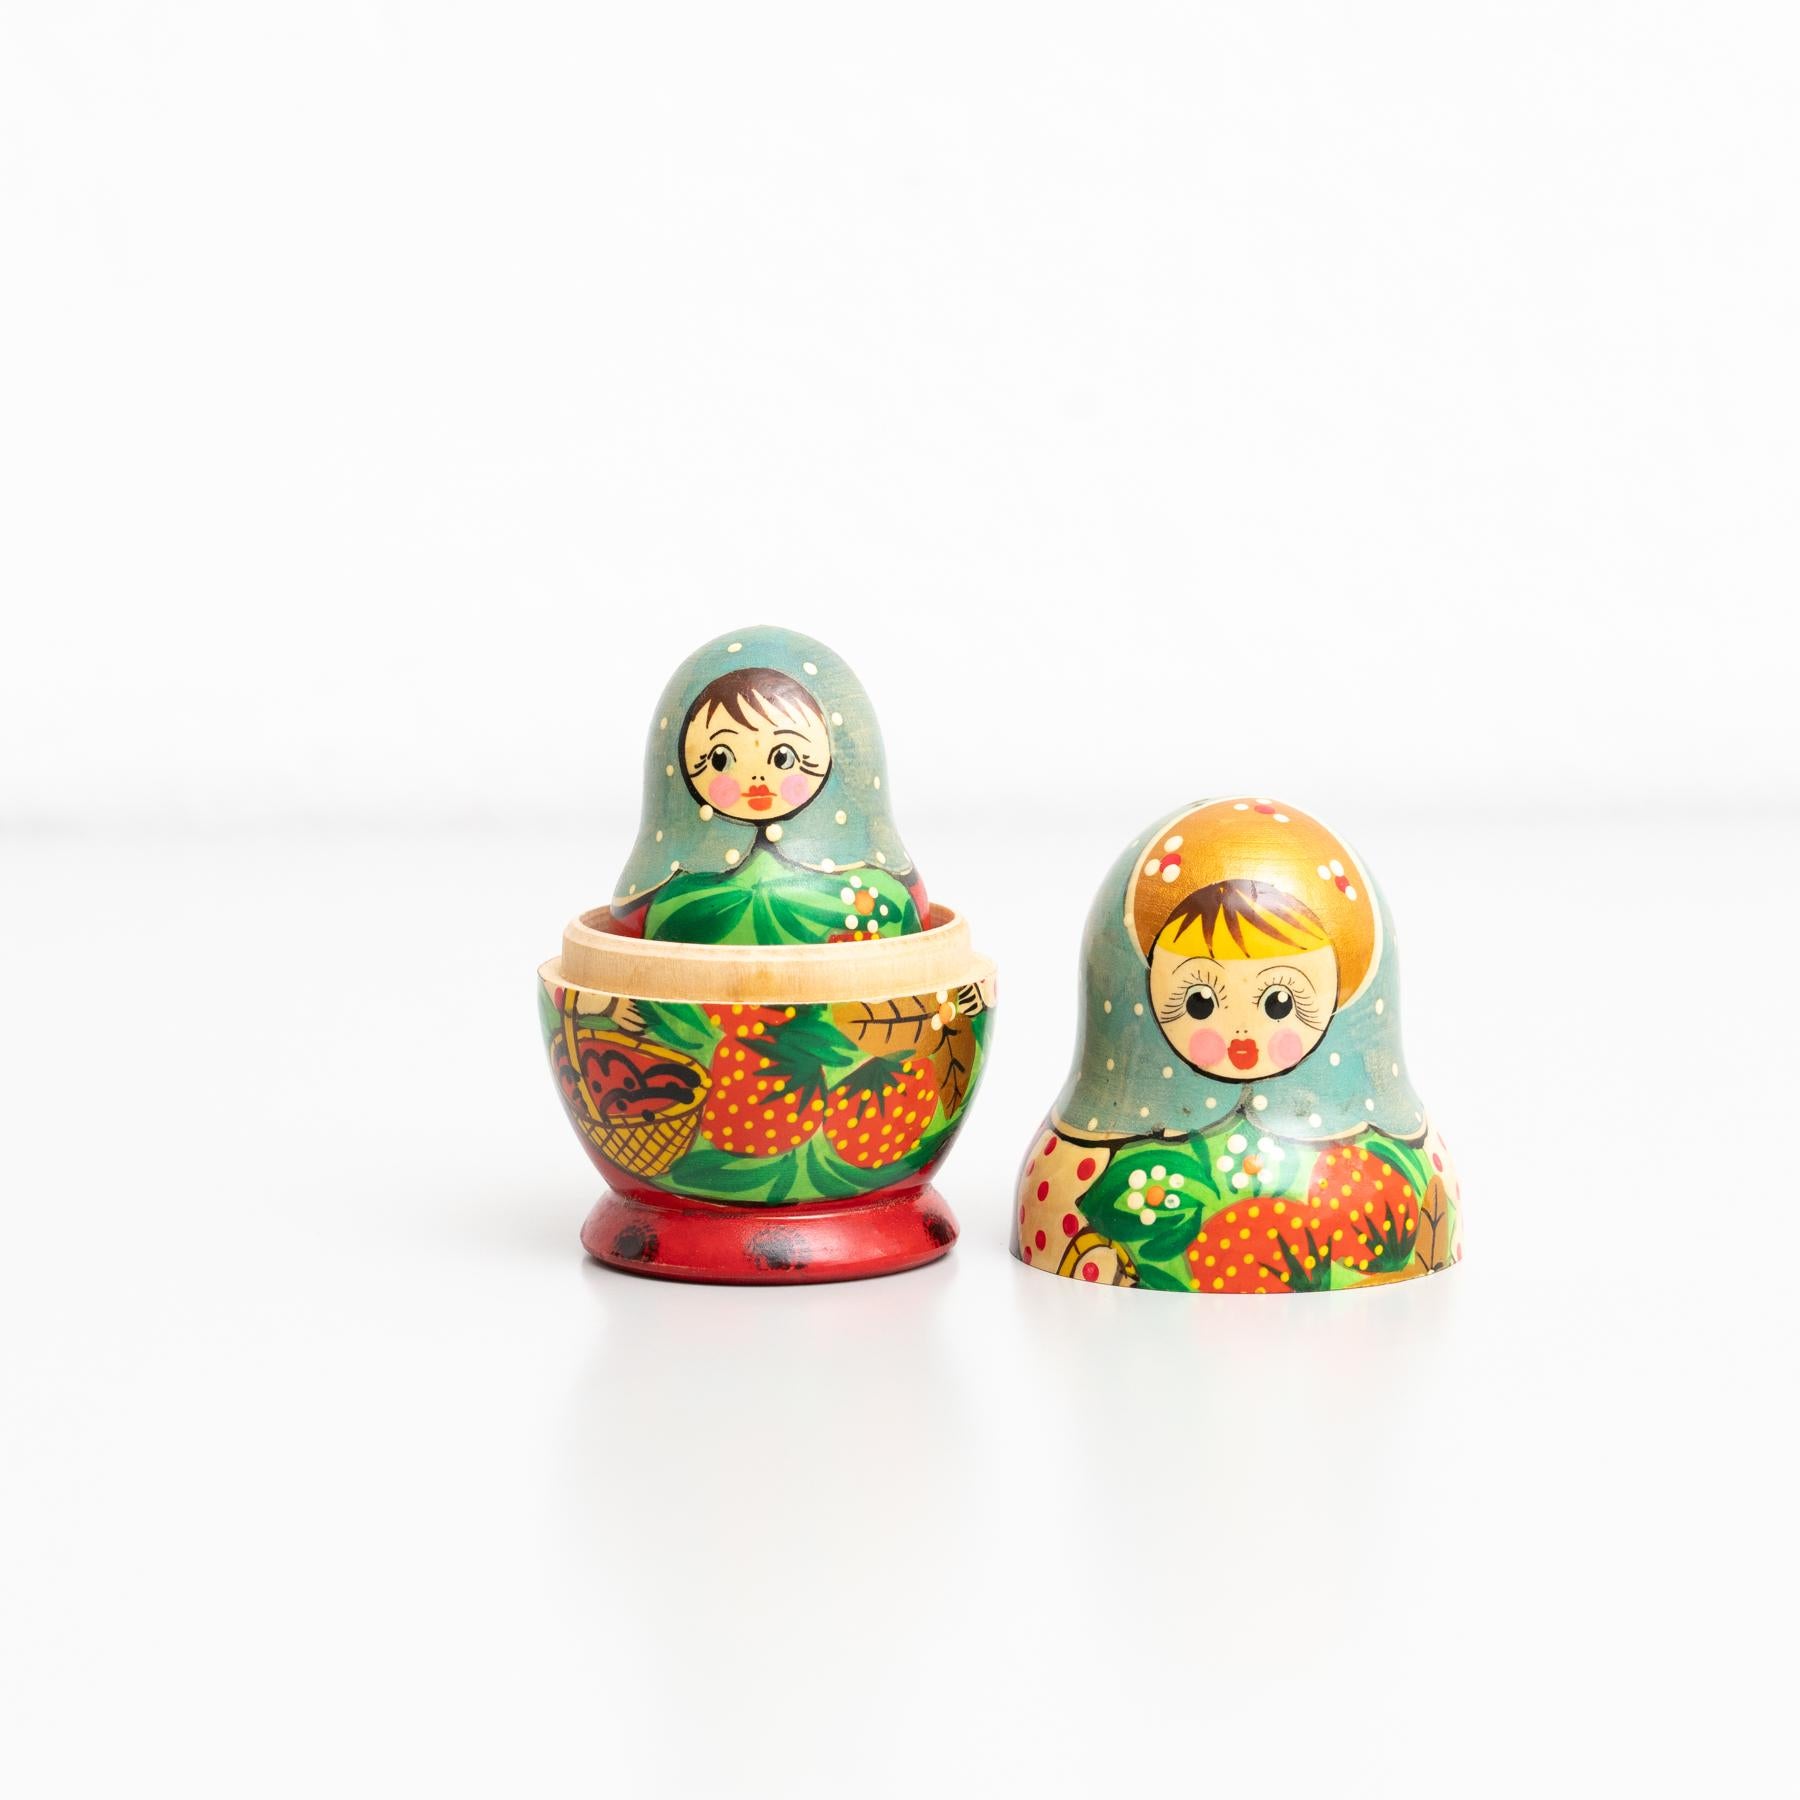 Antique Traditional Hand-Painted Wooden Russian Doll, circa 1960 For Sale 2